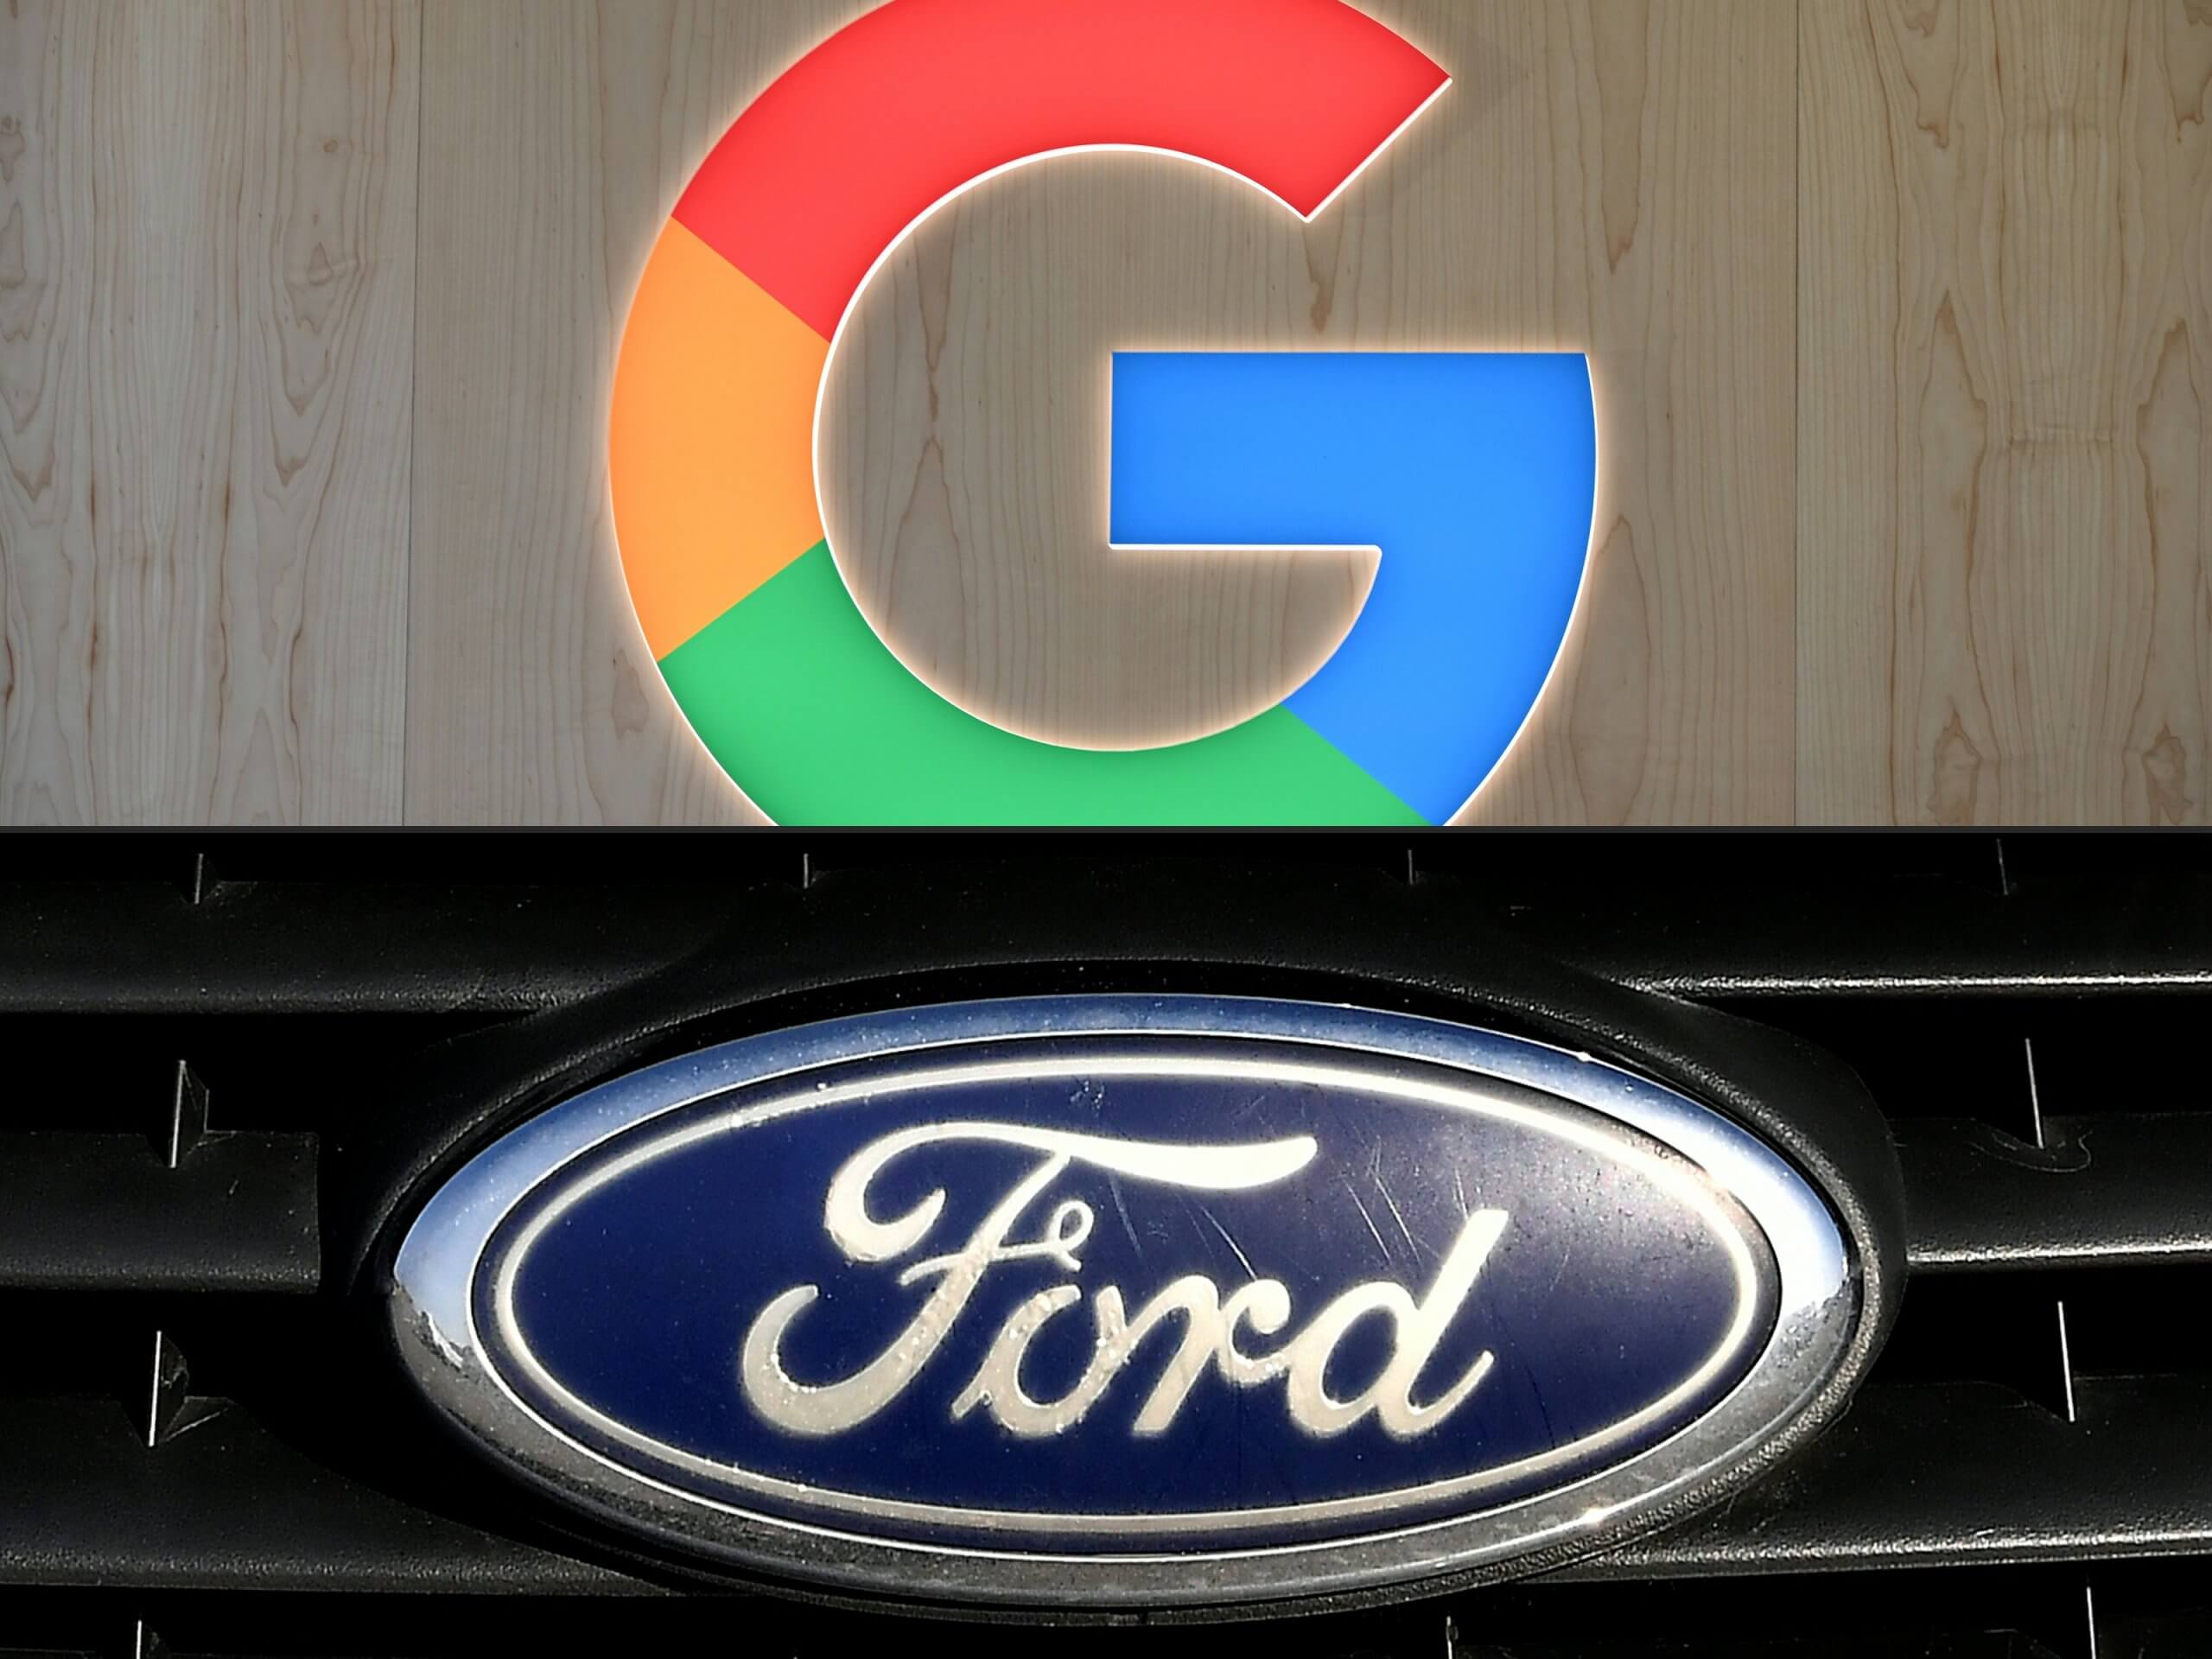 Ford vehicles first to be powered by Google's Android OS